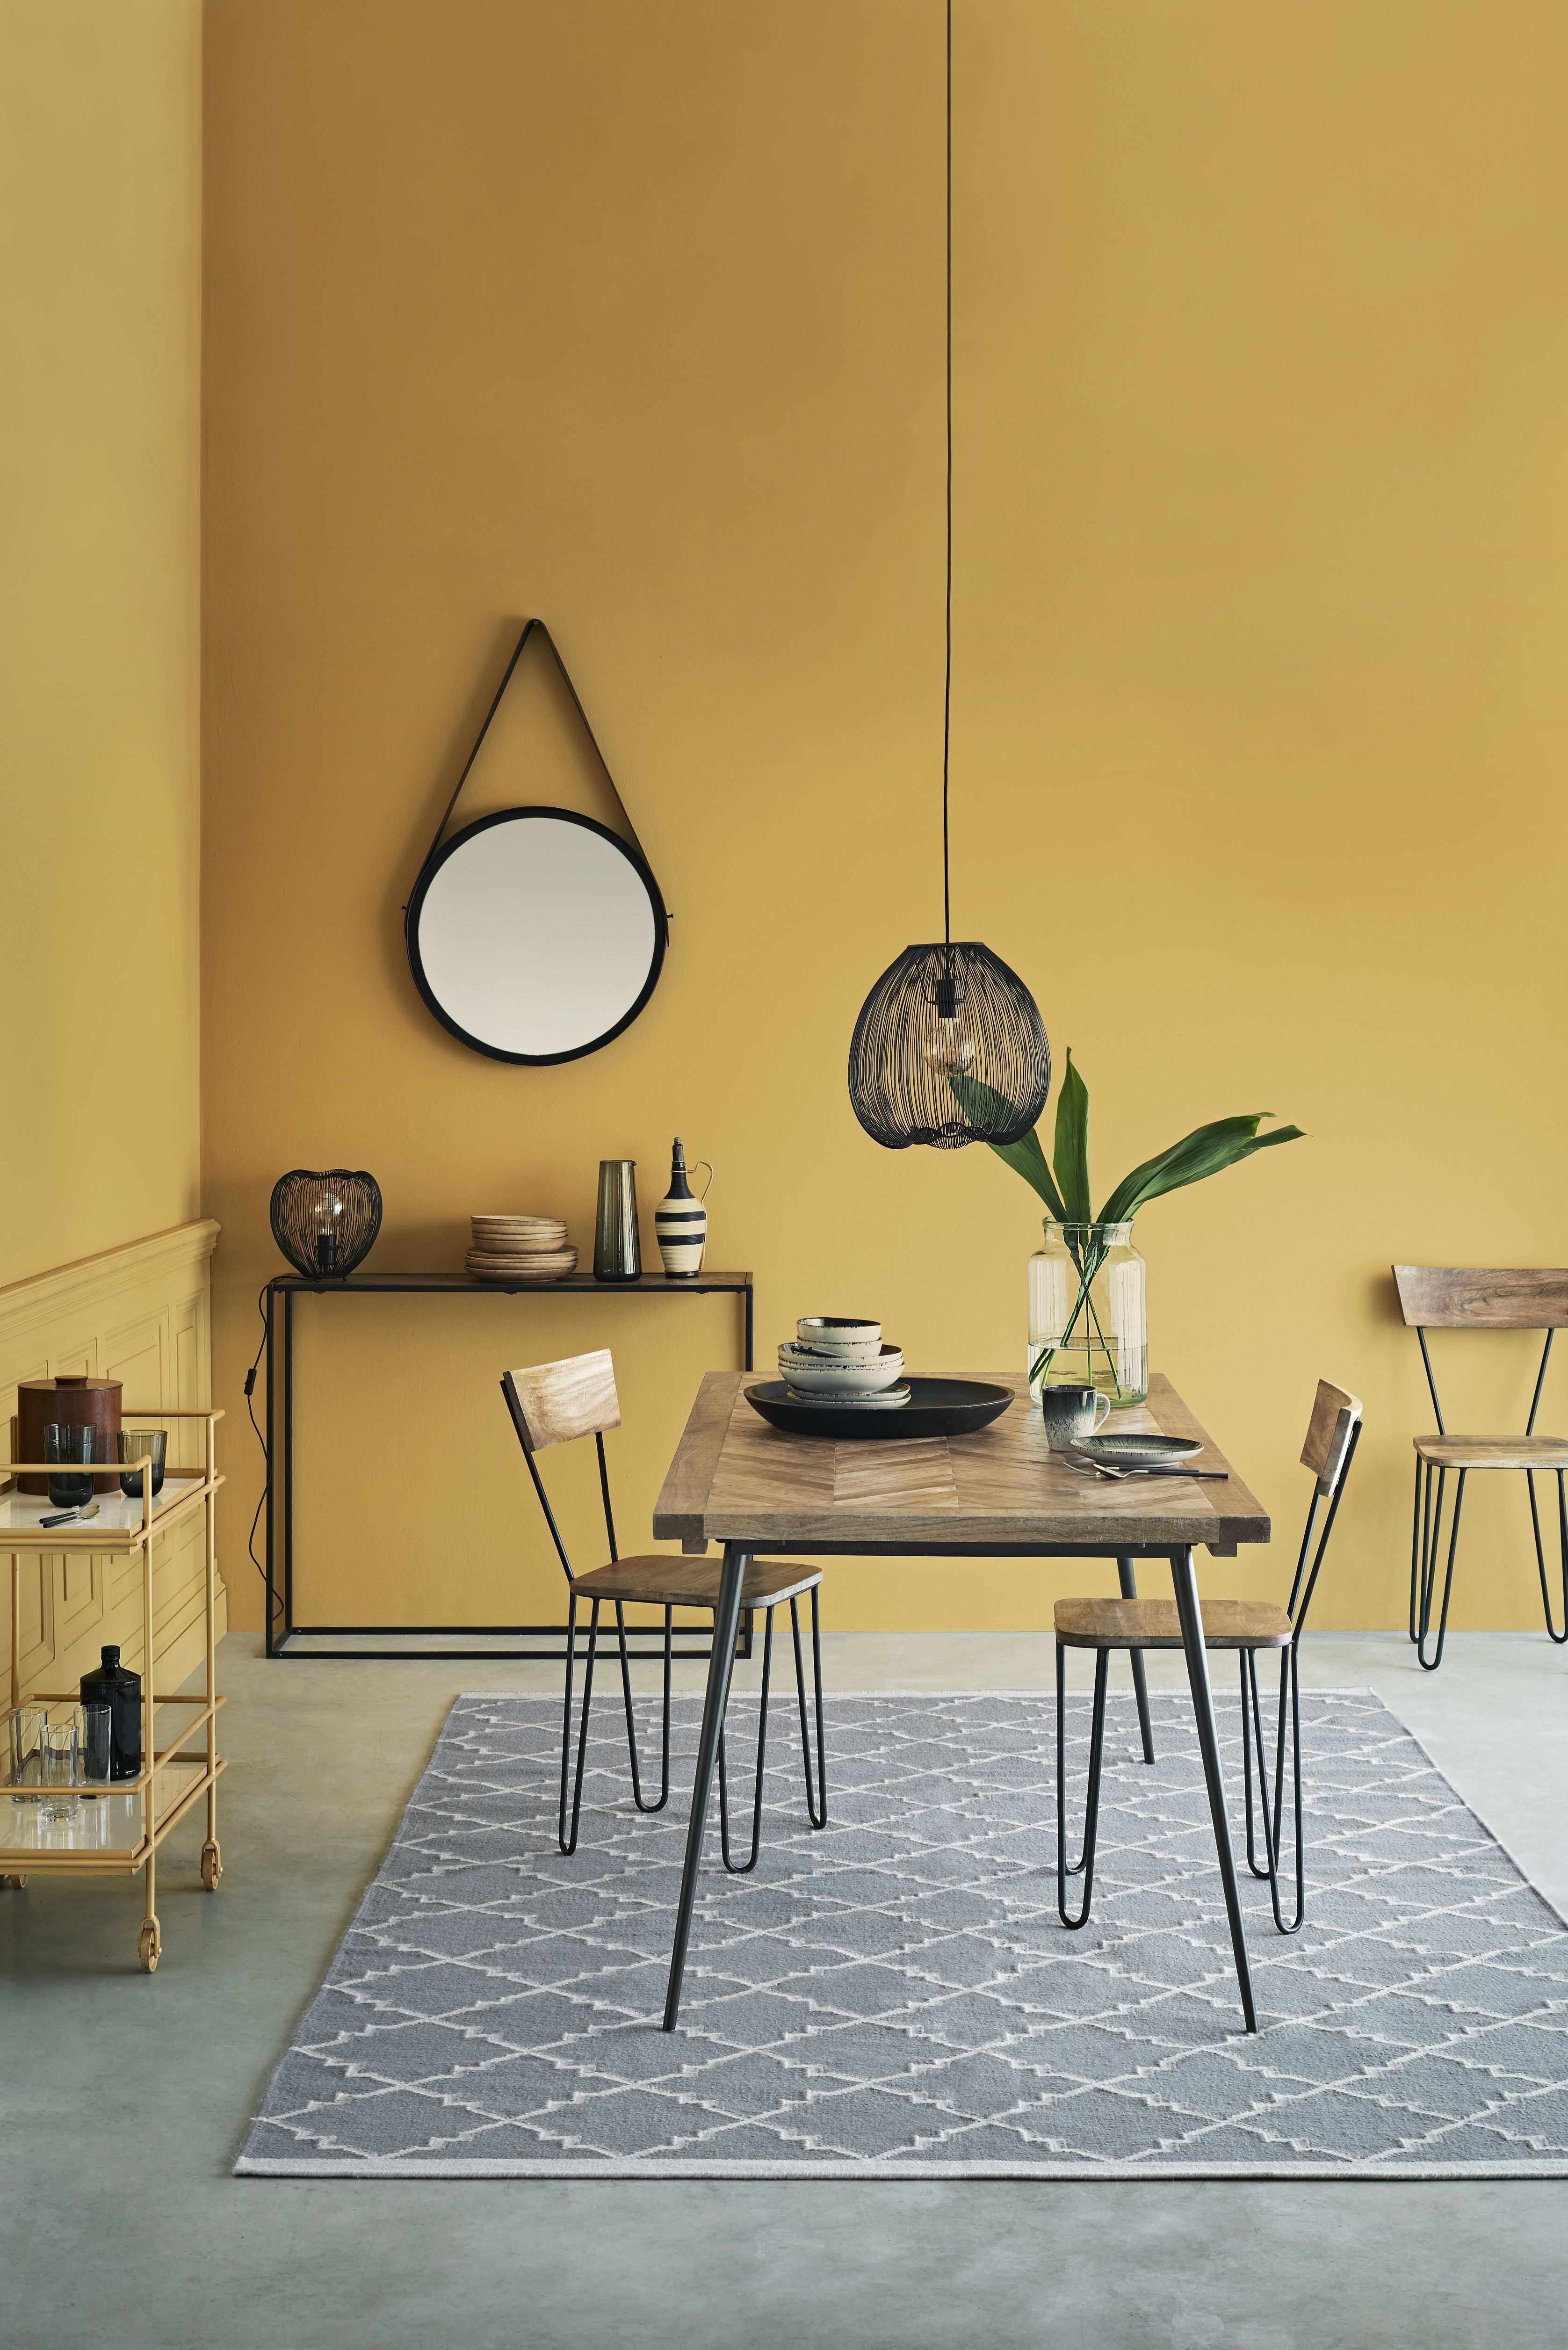 6 Ways To Use Yellow Paint At Home For A Burst Of Happiness All Year Round